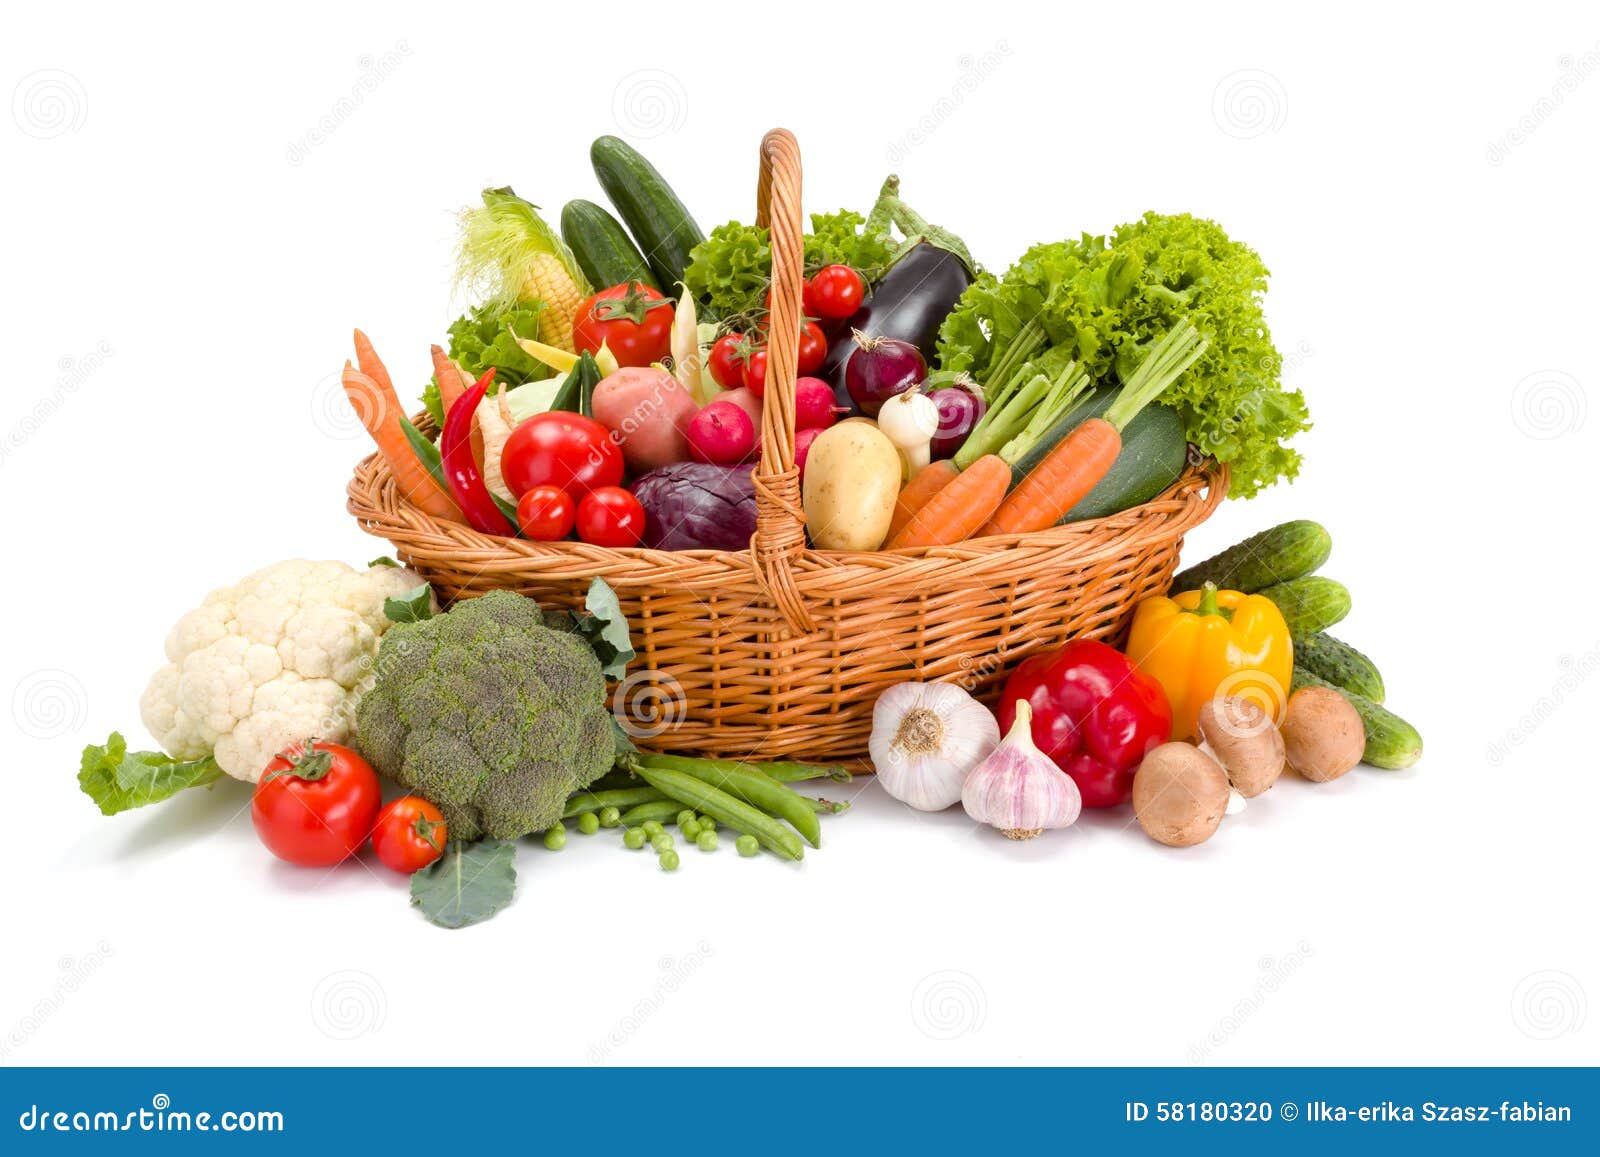 basket with various fresh vegetables